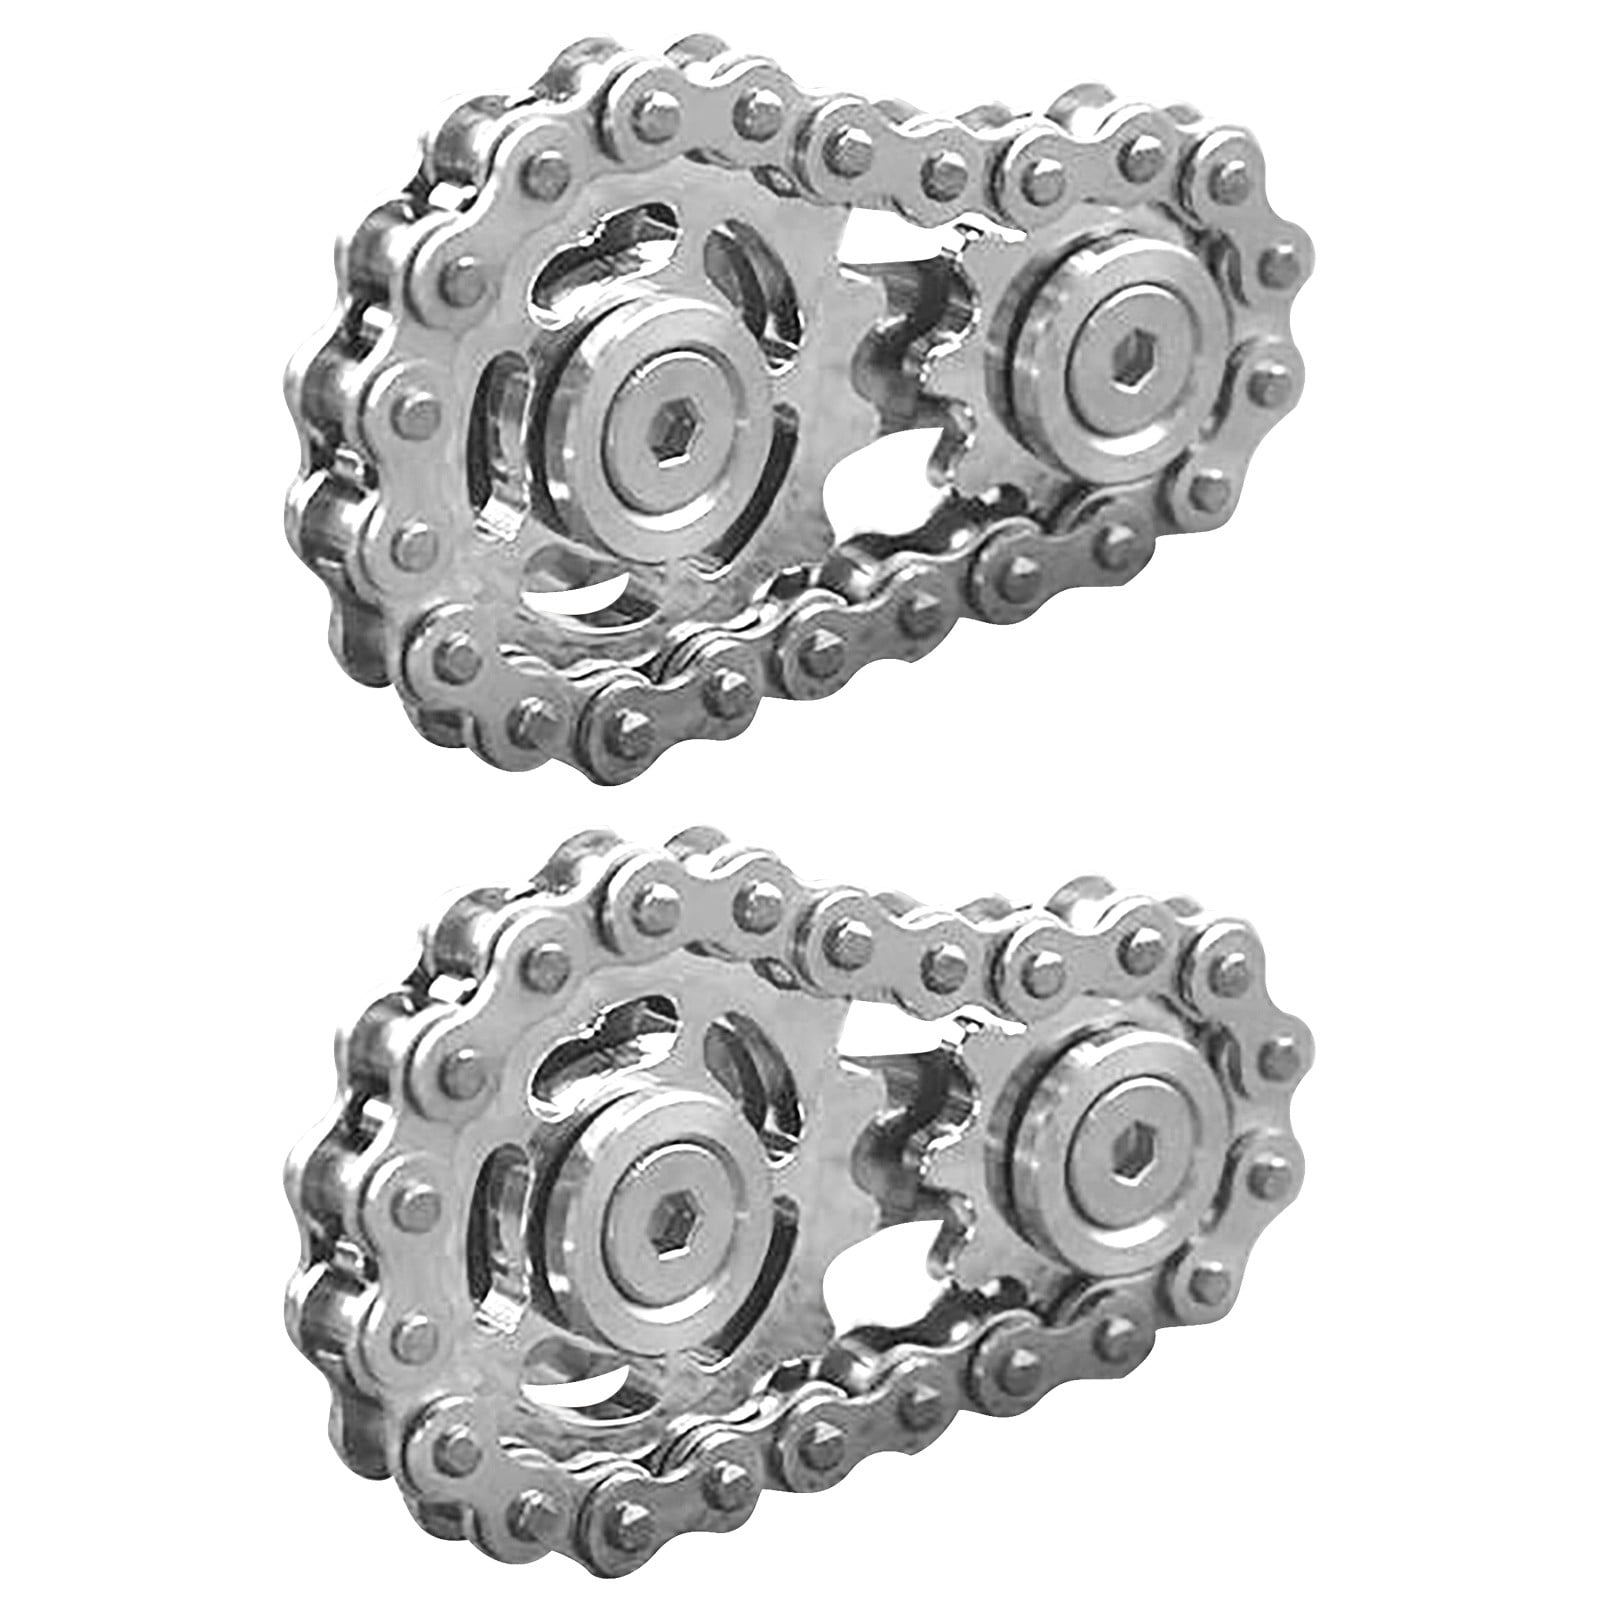 Details about   EDC Sprockets Chains Decompression Fingertips Top Gearwheel Gyro Toy CA 